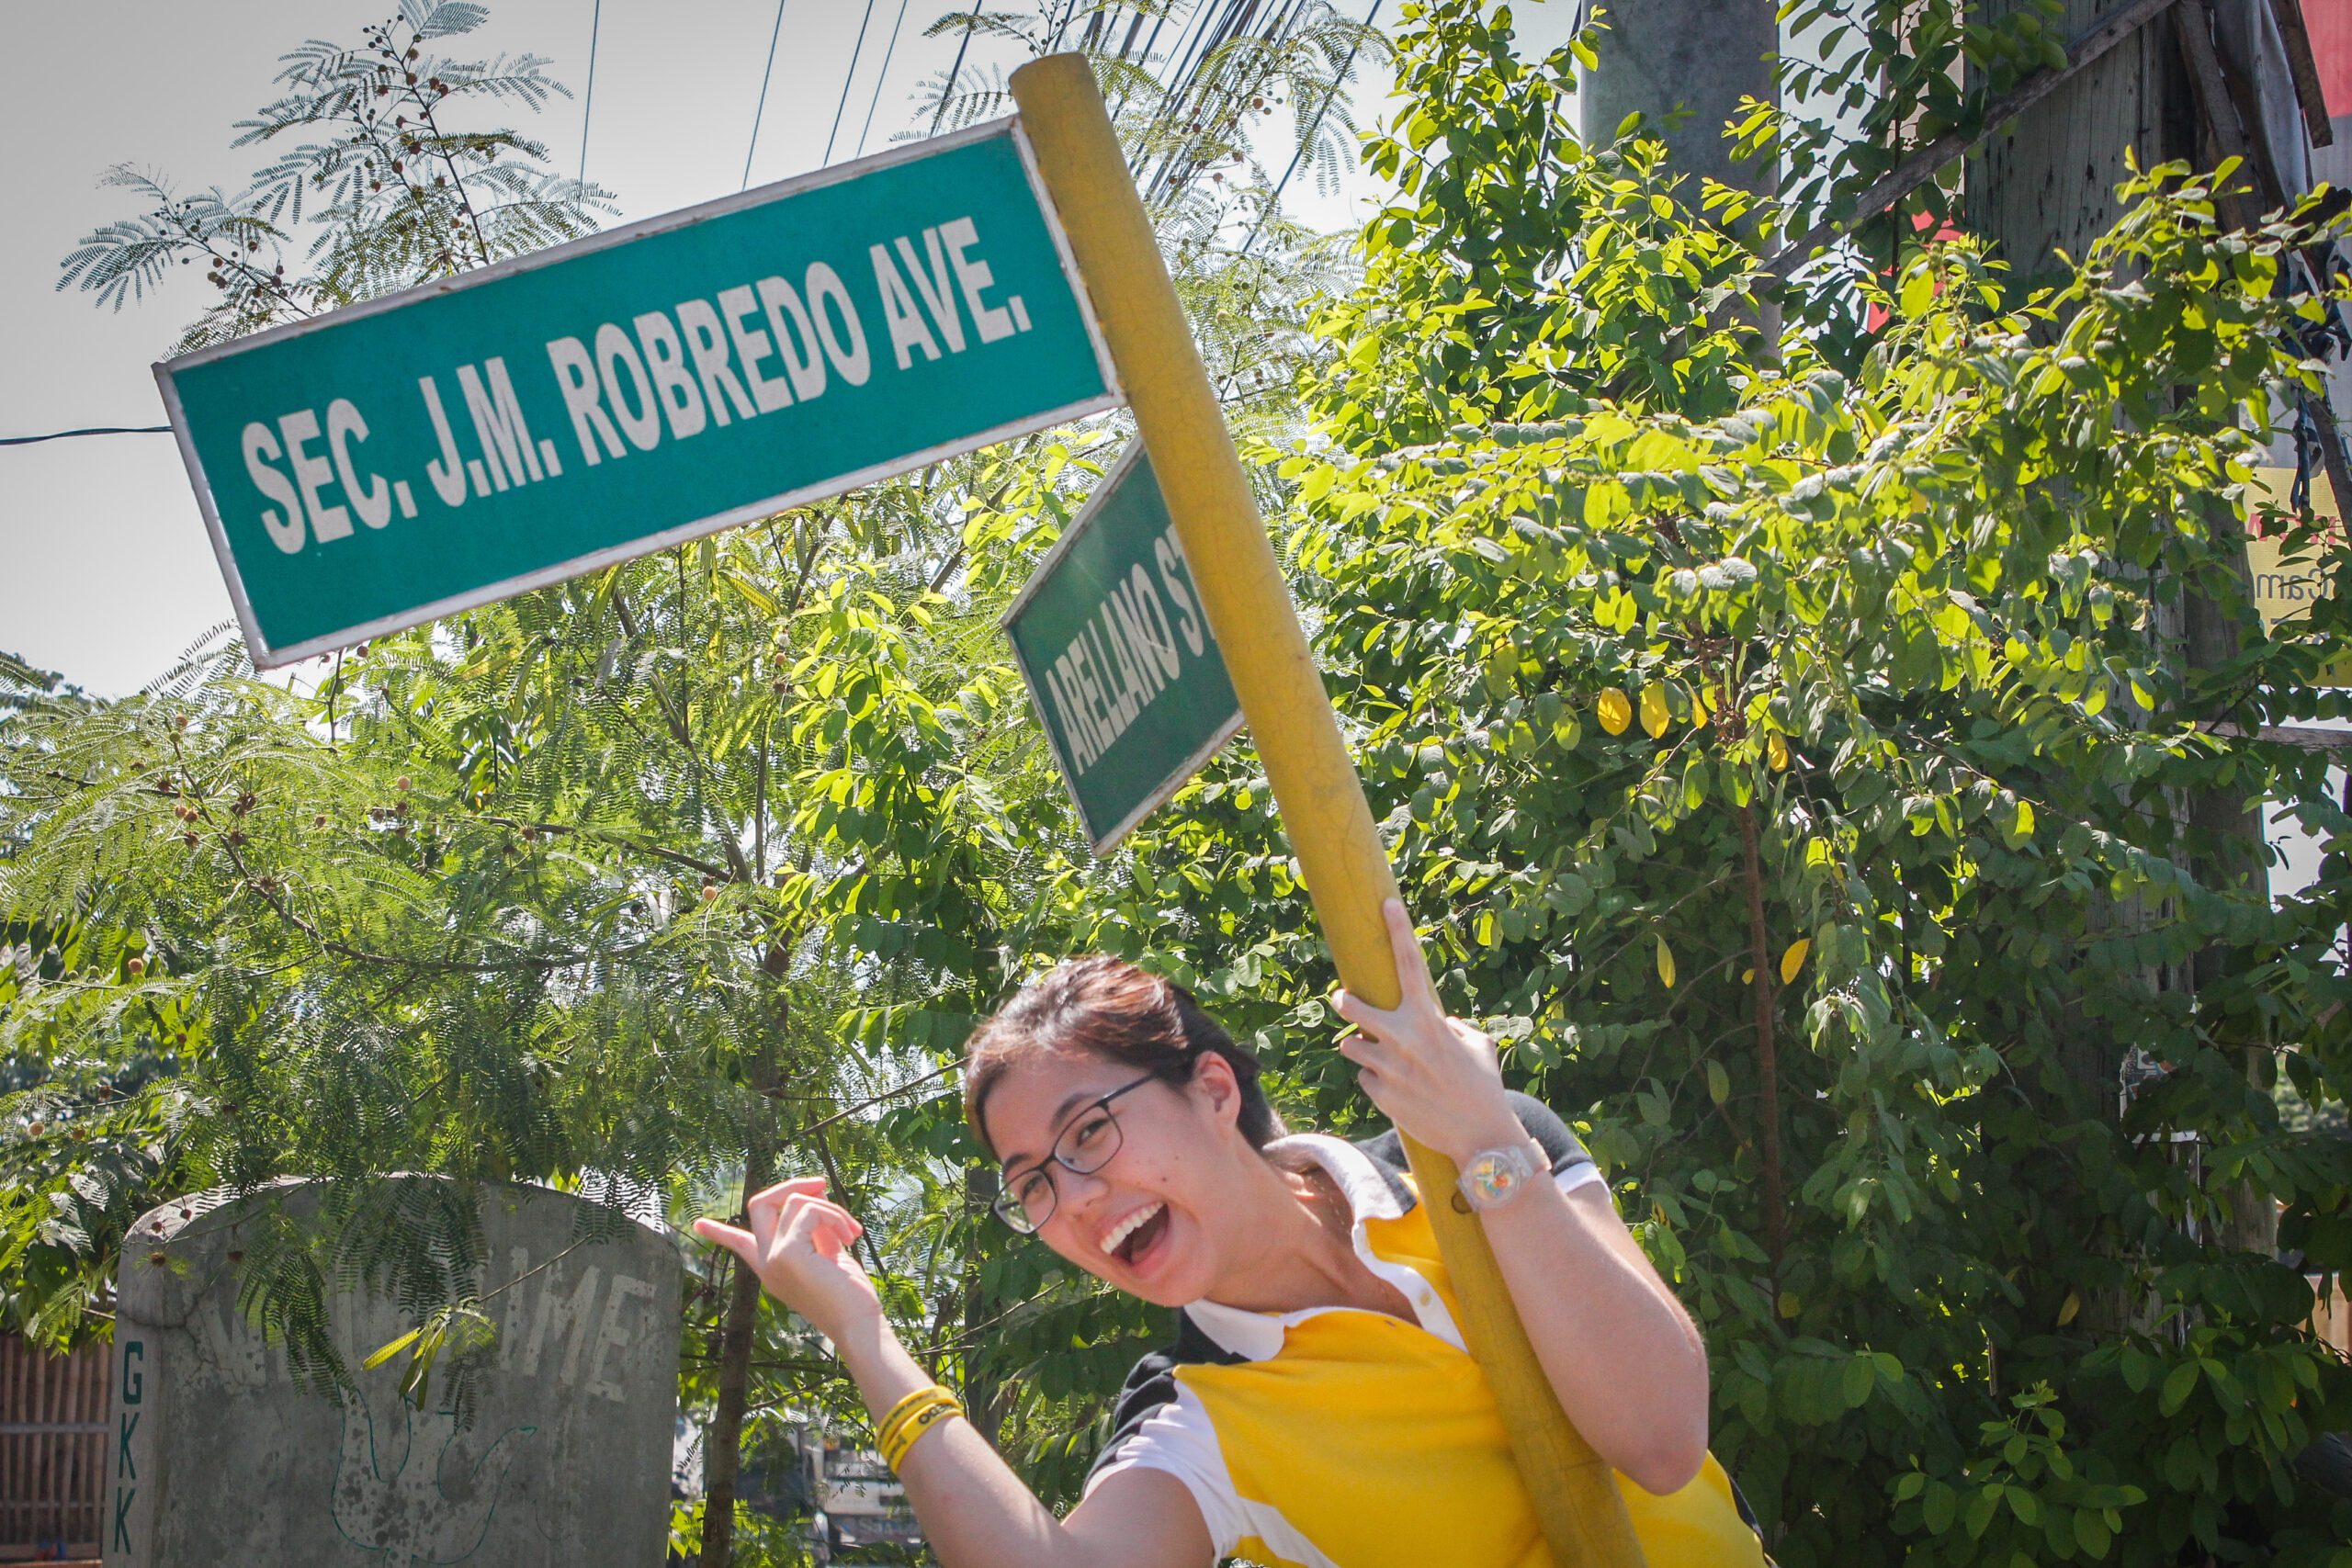 There’s a street named after Jesse Robredo, and it’s not in Naga